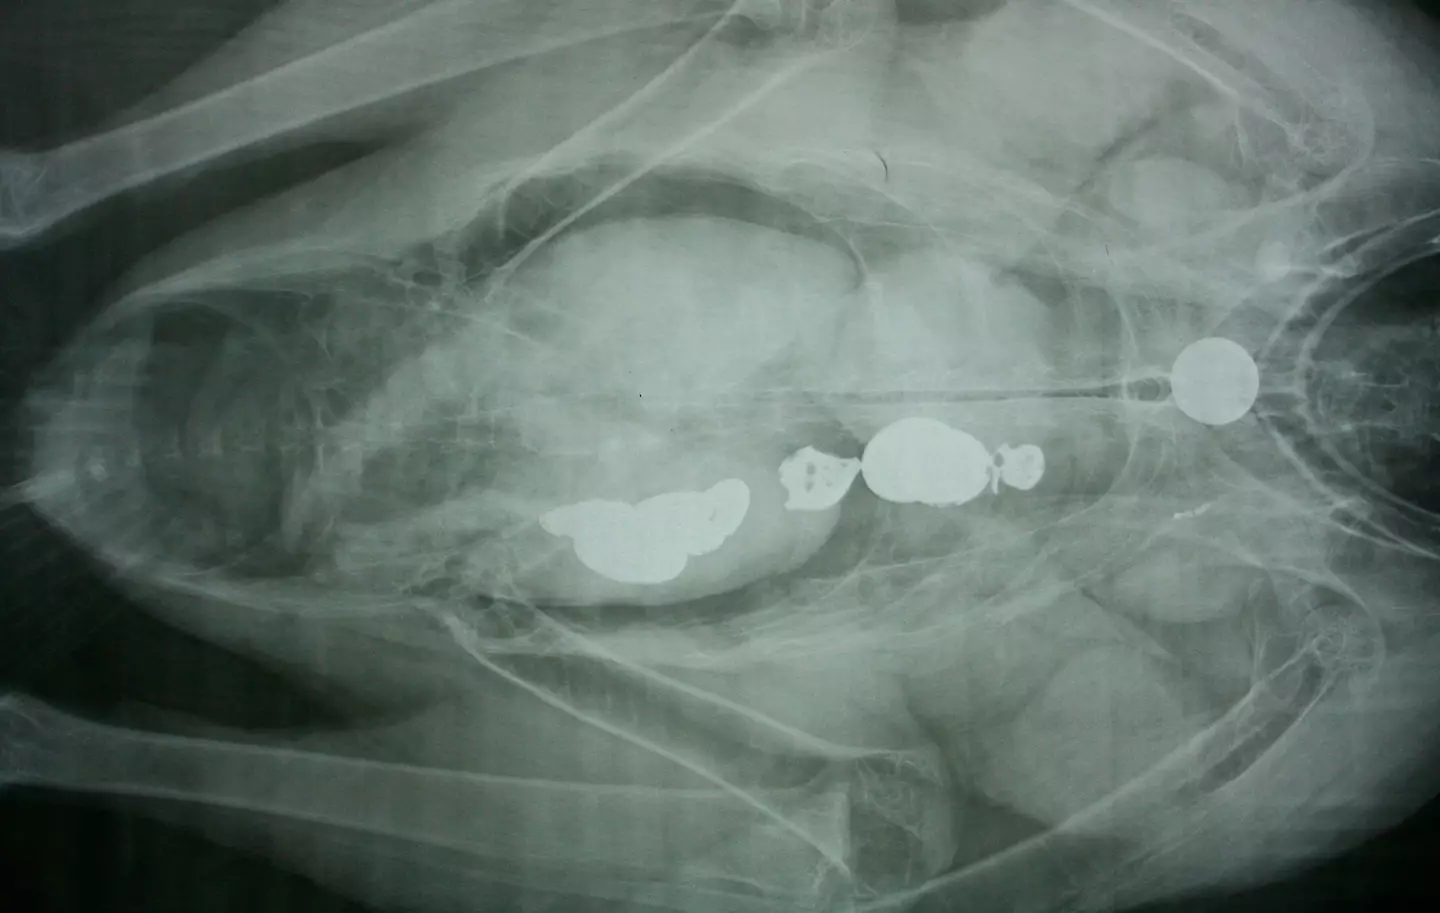 X-ray of a condor who's ingested a key.